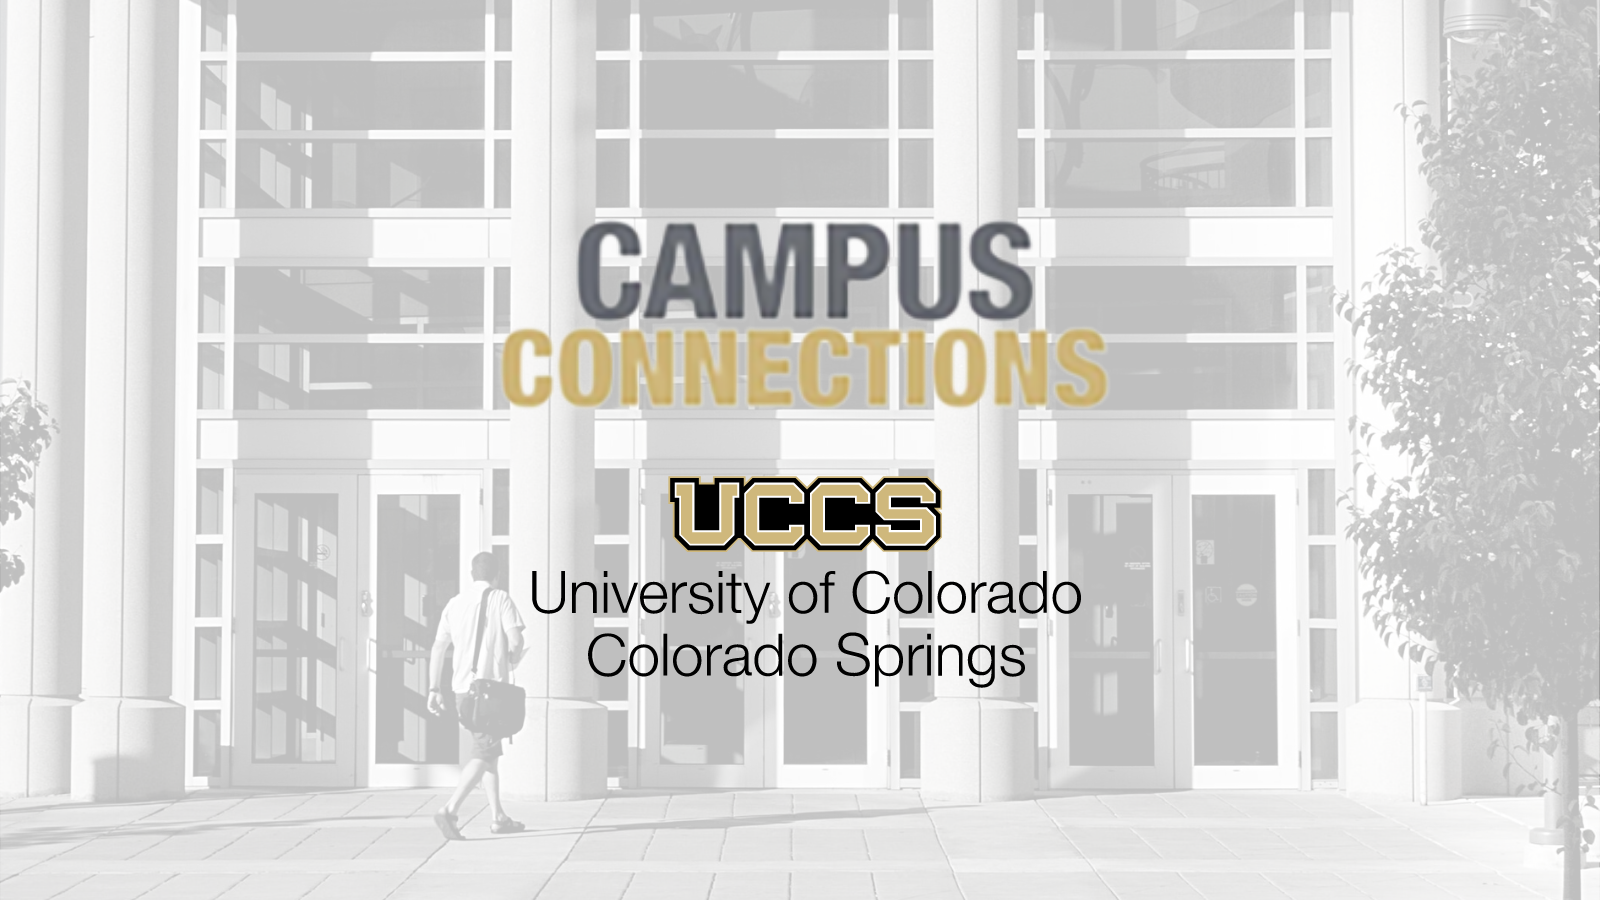 Image of building with text: "Campus Connections, UCCS, University of Colorado Colorado Springs